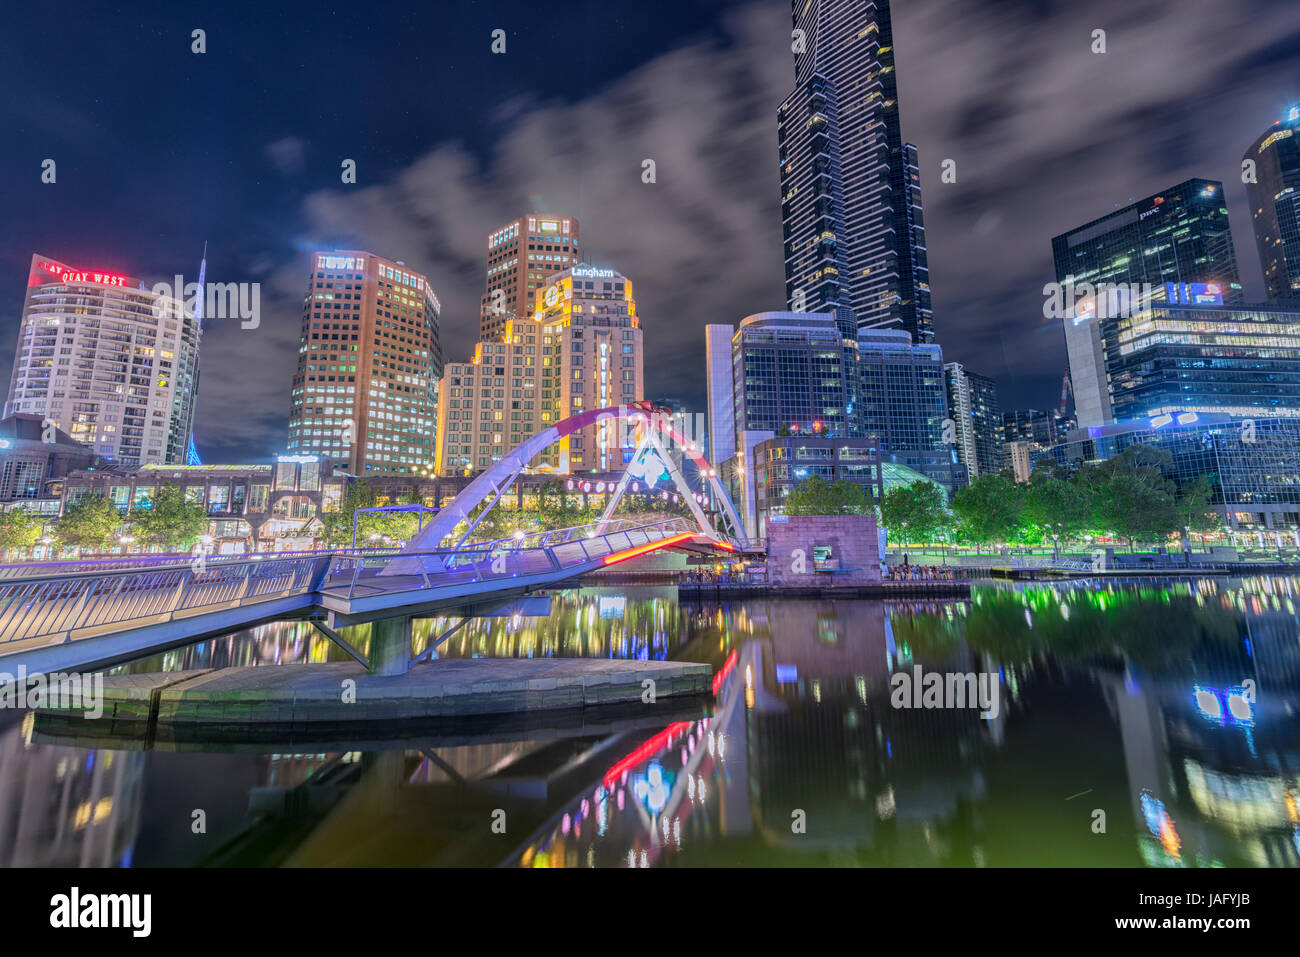 The Beautiful Melbourne City At Night With Colorful City Lights